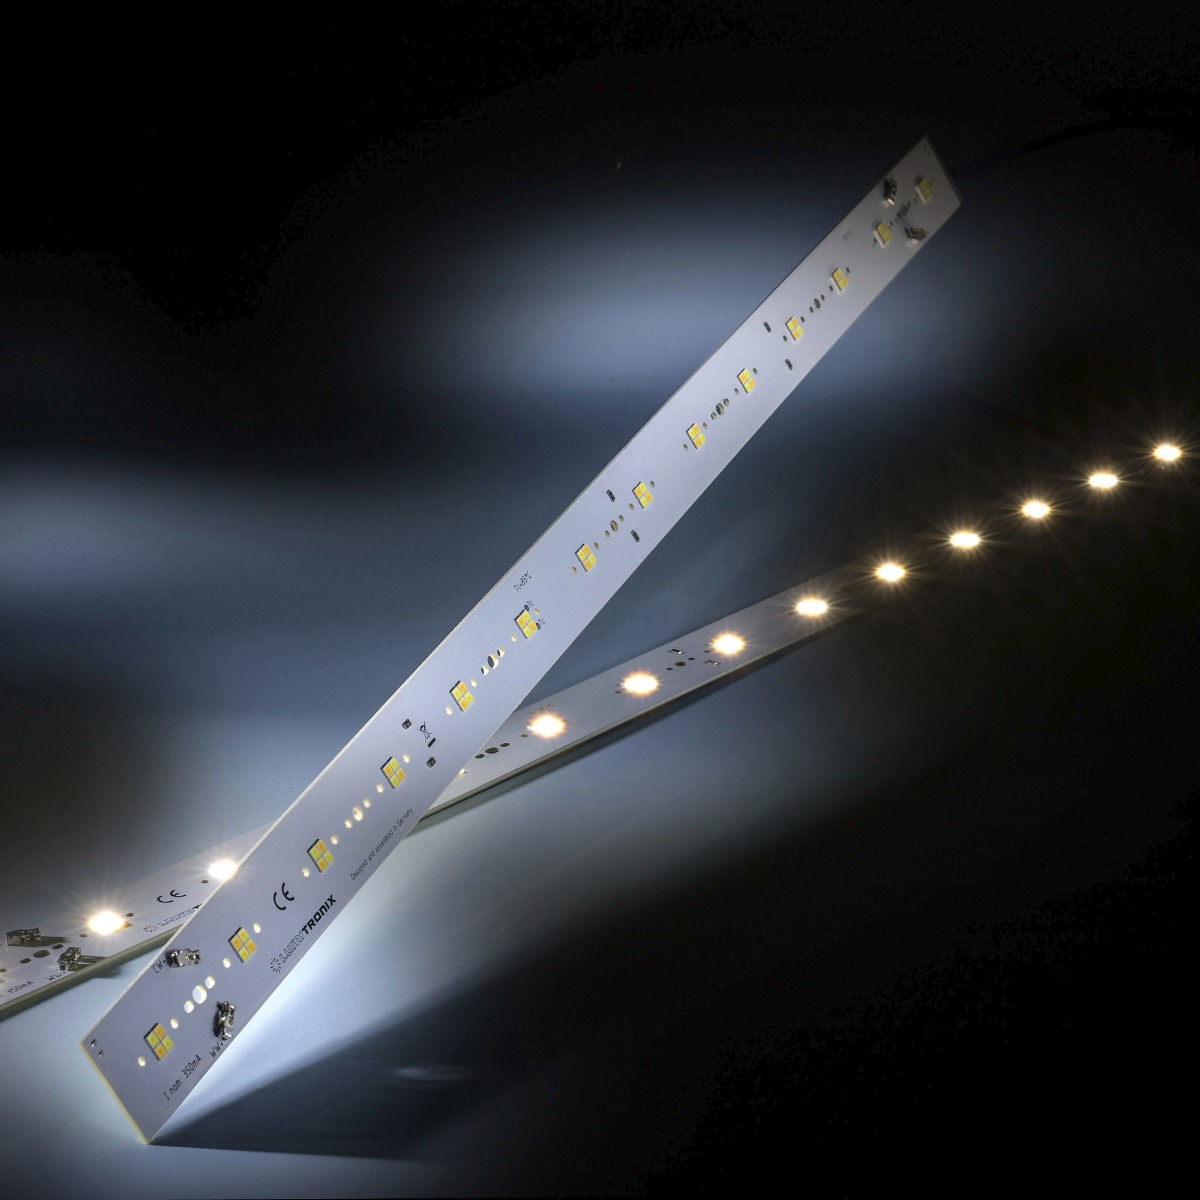 Daisy 56 Nichia LED Strip Tunable White 2700-4000K 1190 +1250lm 350mA 20V 56 LEDs 56cm module (up to 1450lm/m and 8W/m)